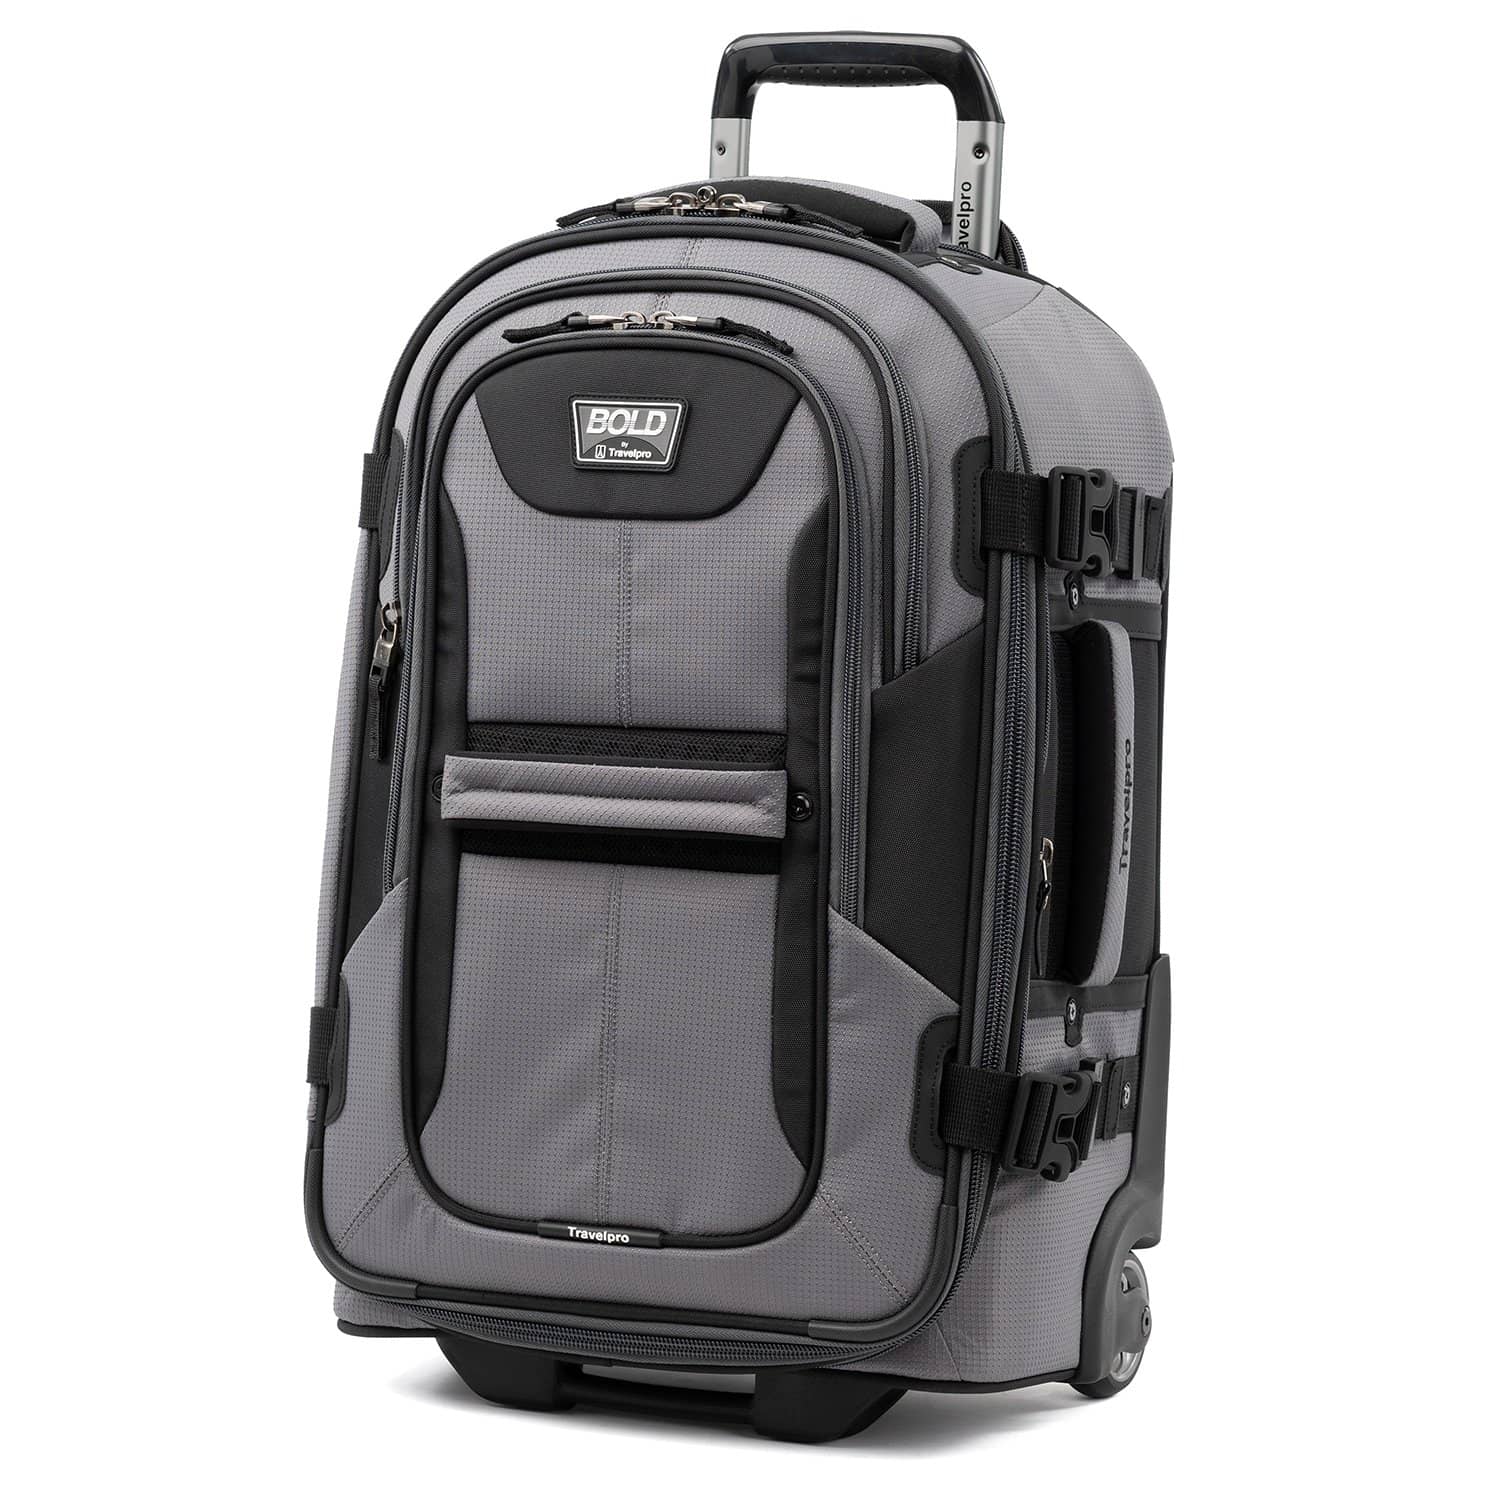 Crew™ Executive Choice™ 2 Pilot Brief – Travelpro Luggage Outlet